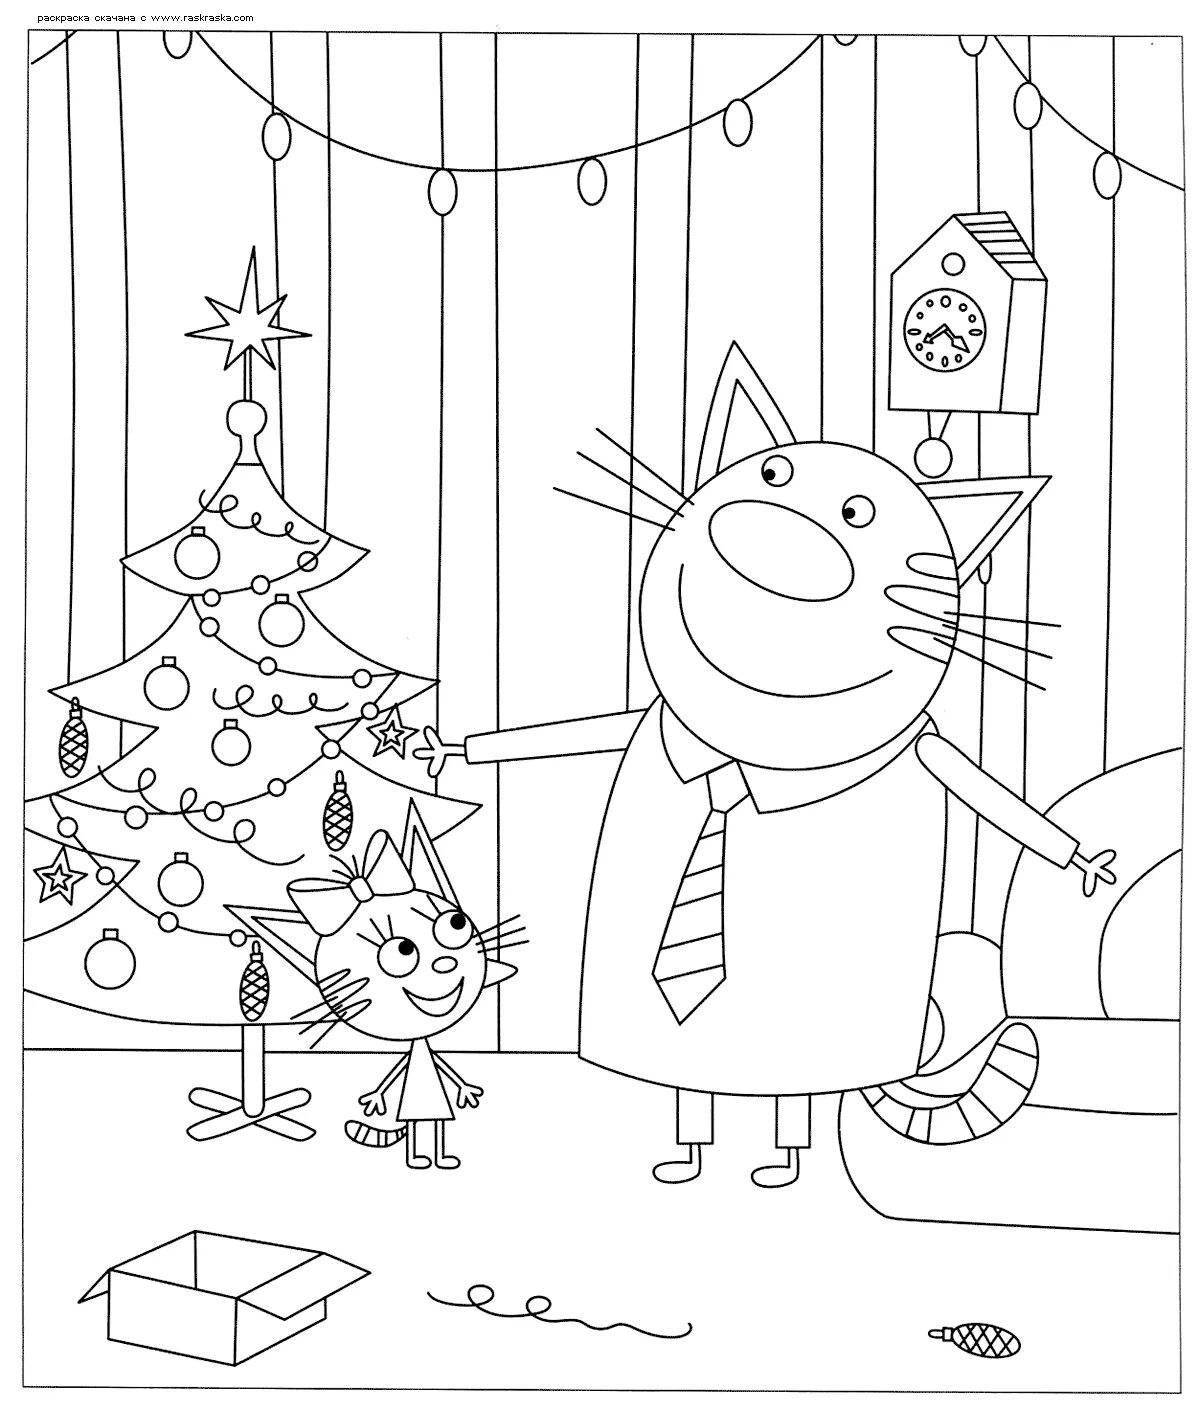 Three cats brightly colored Christmas coloring book